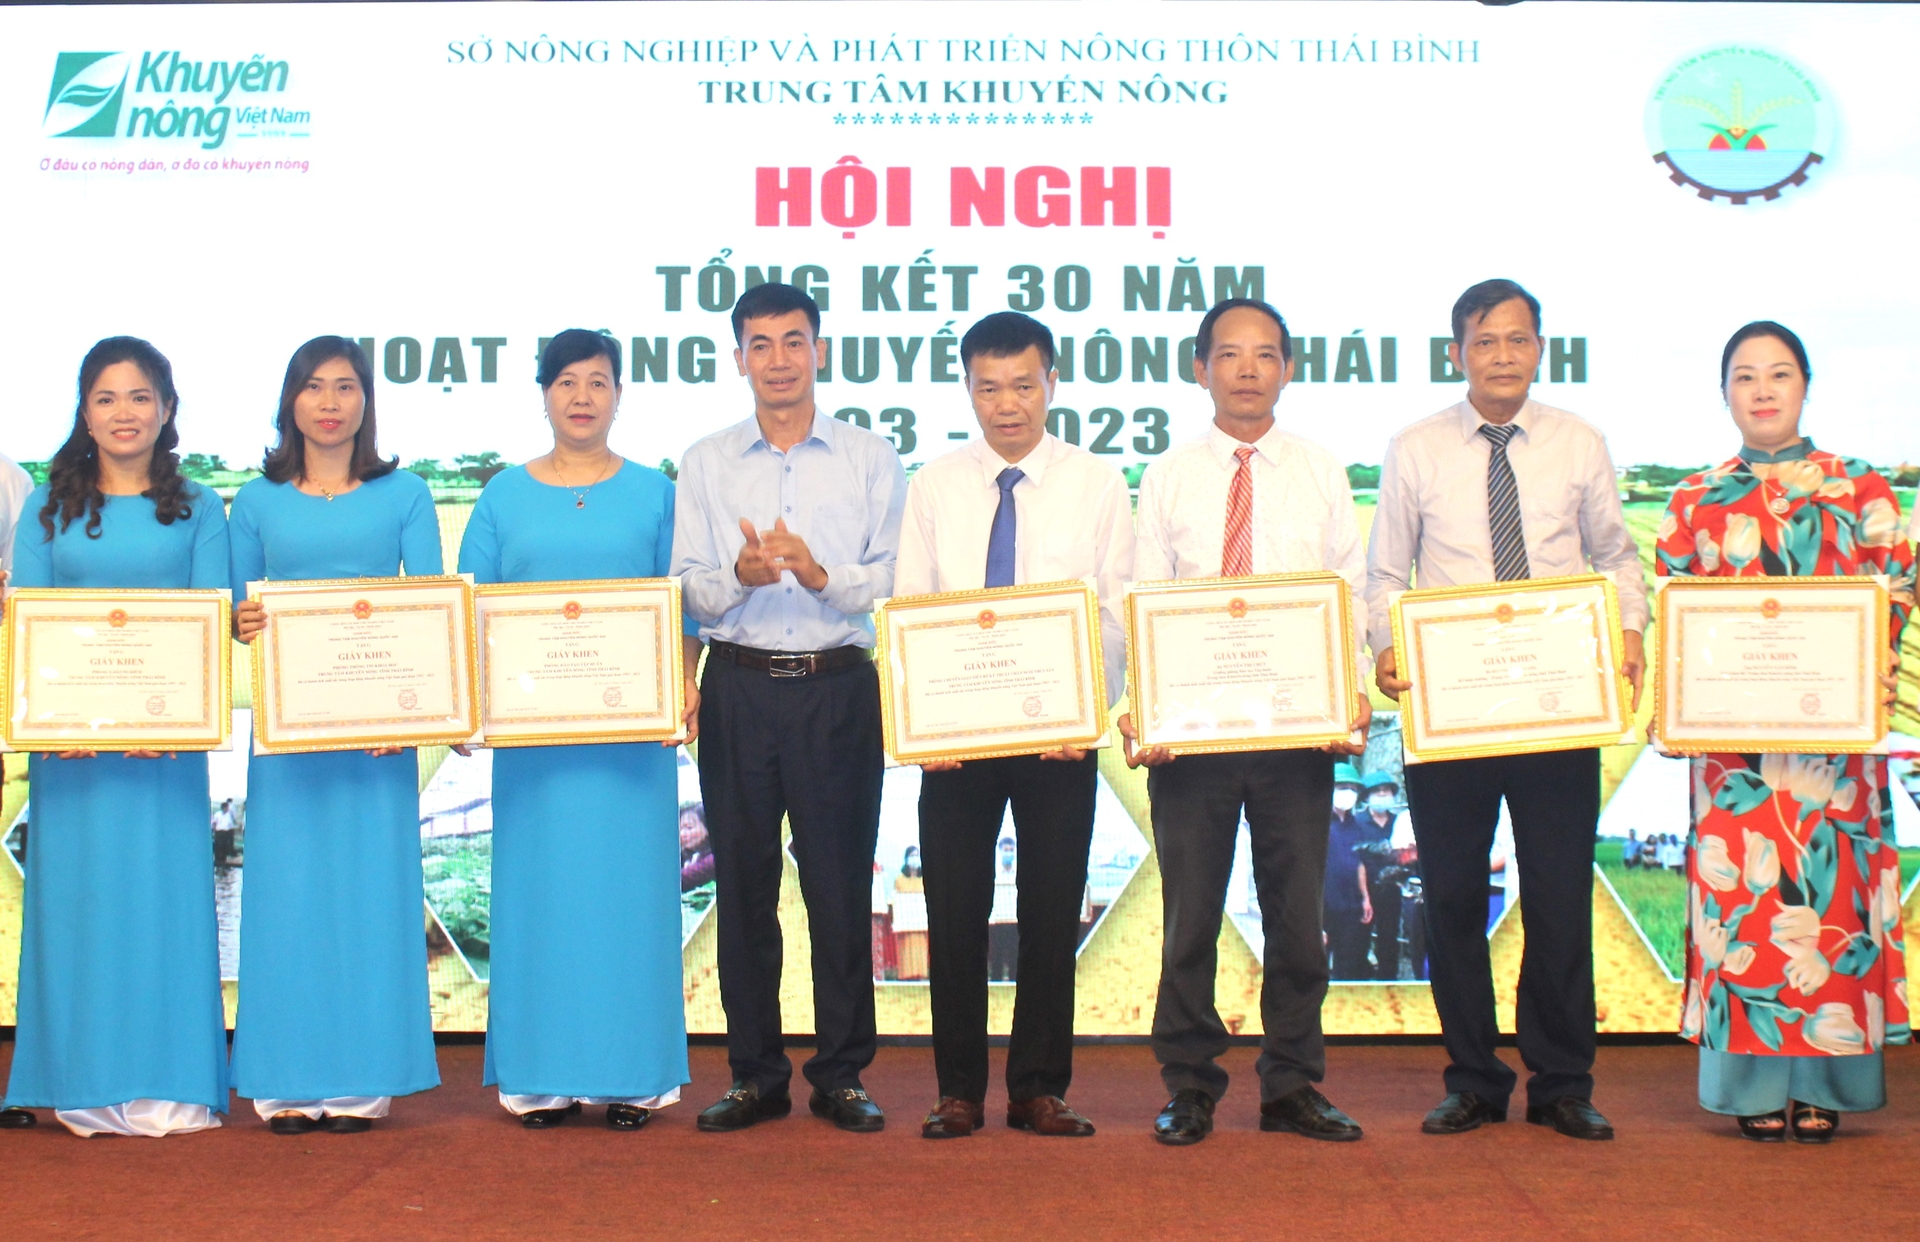 Mr. Hoang Van Hong, Deputy Director of the National Agricultural Extension Center awarded the certificate of merit from the Director of the National Agricultural Extension Center to collectives and individuals of the Thai Binh agricultural extension system who have had excellent achievements in activities. Photo: Trung Quan.